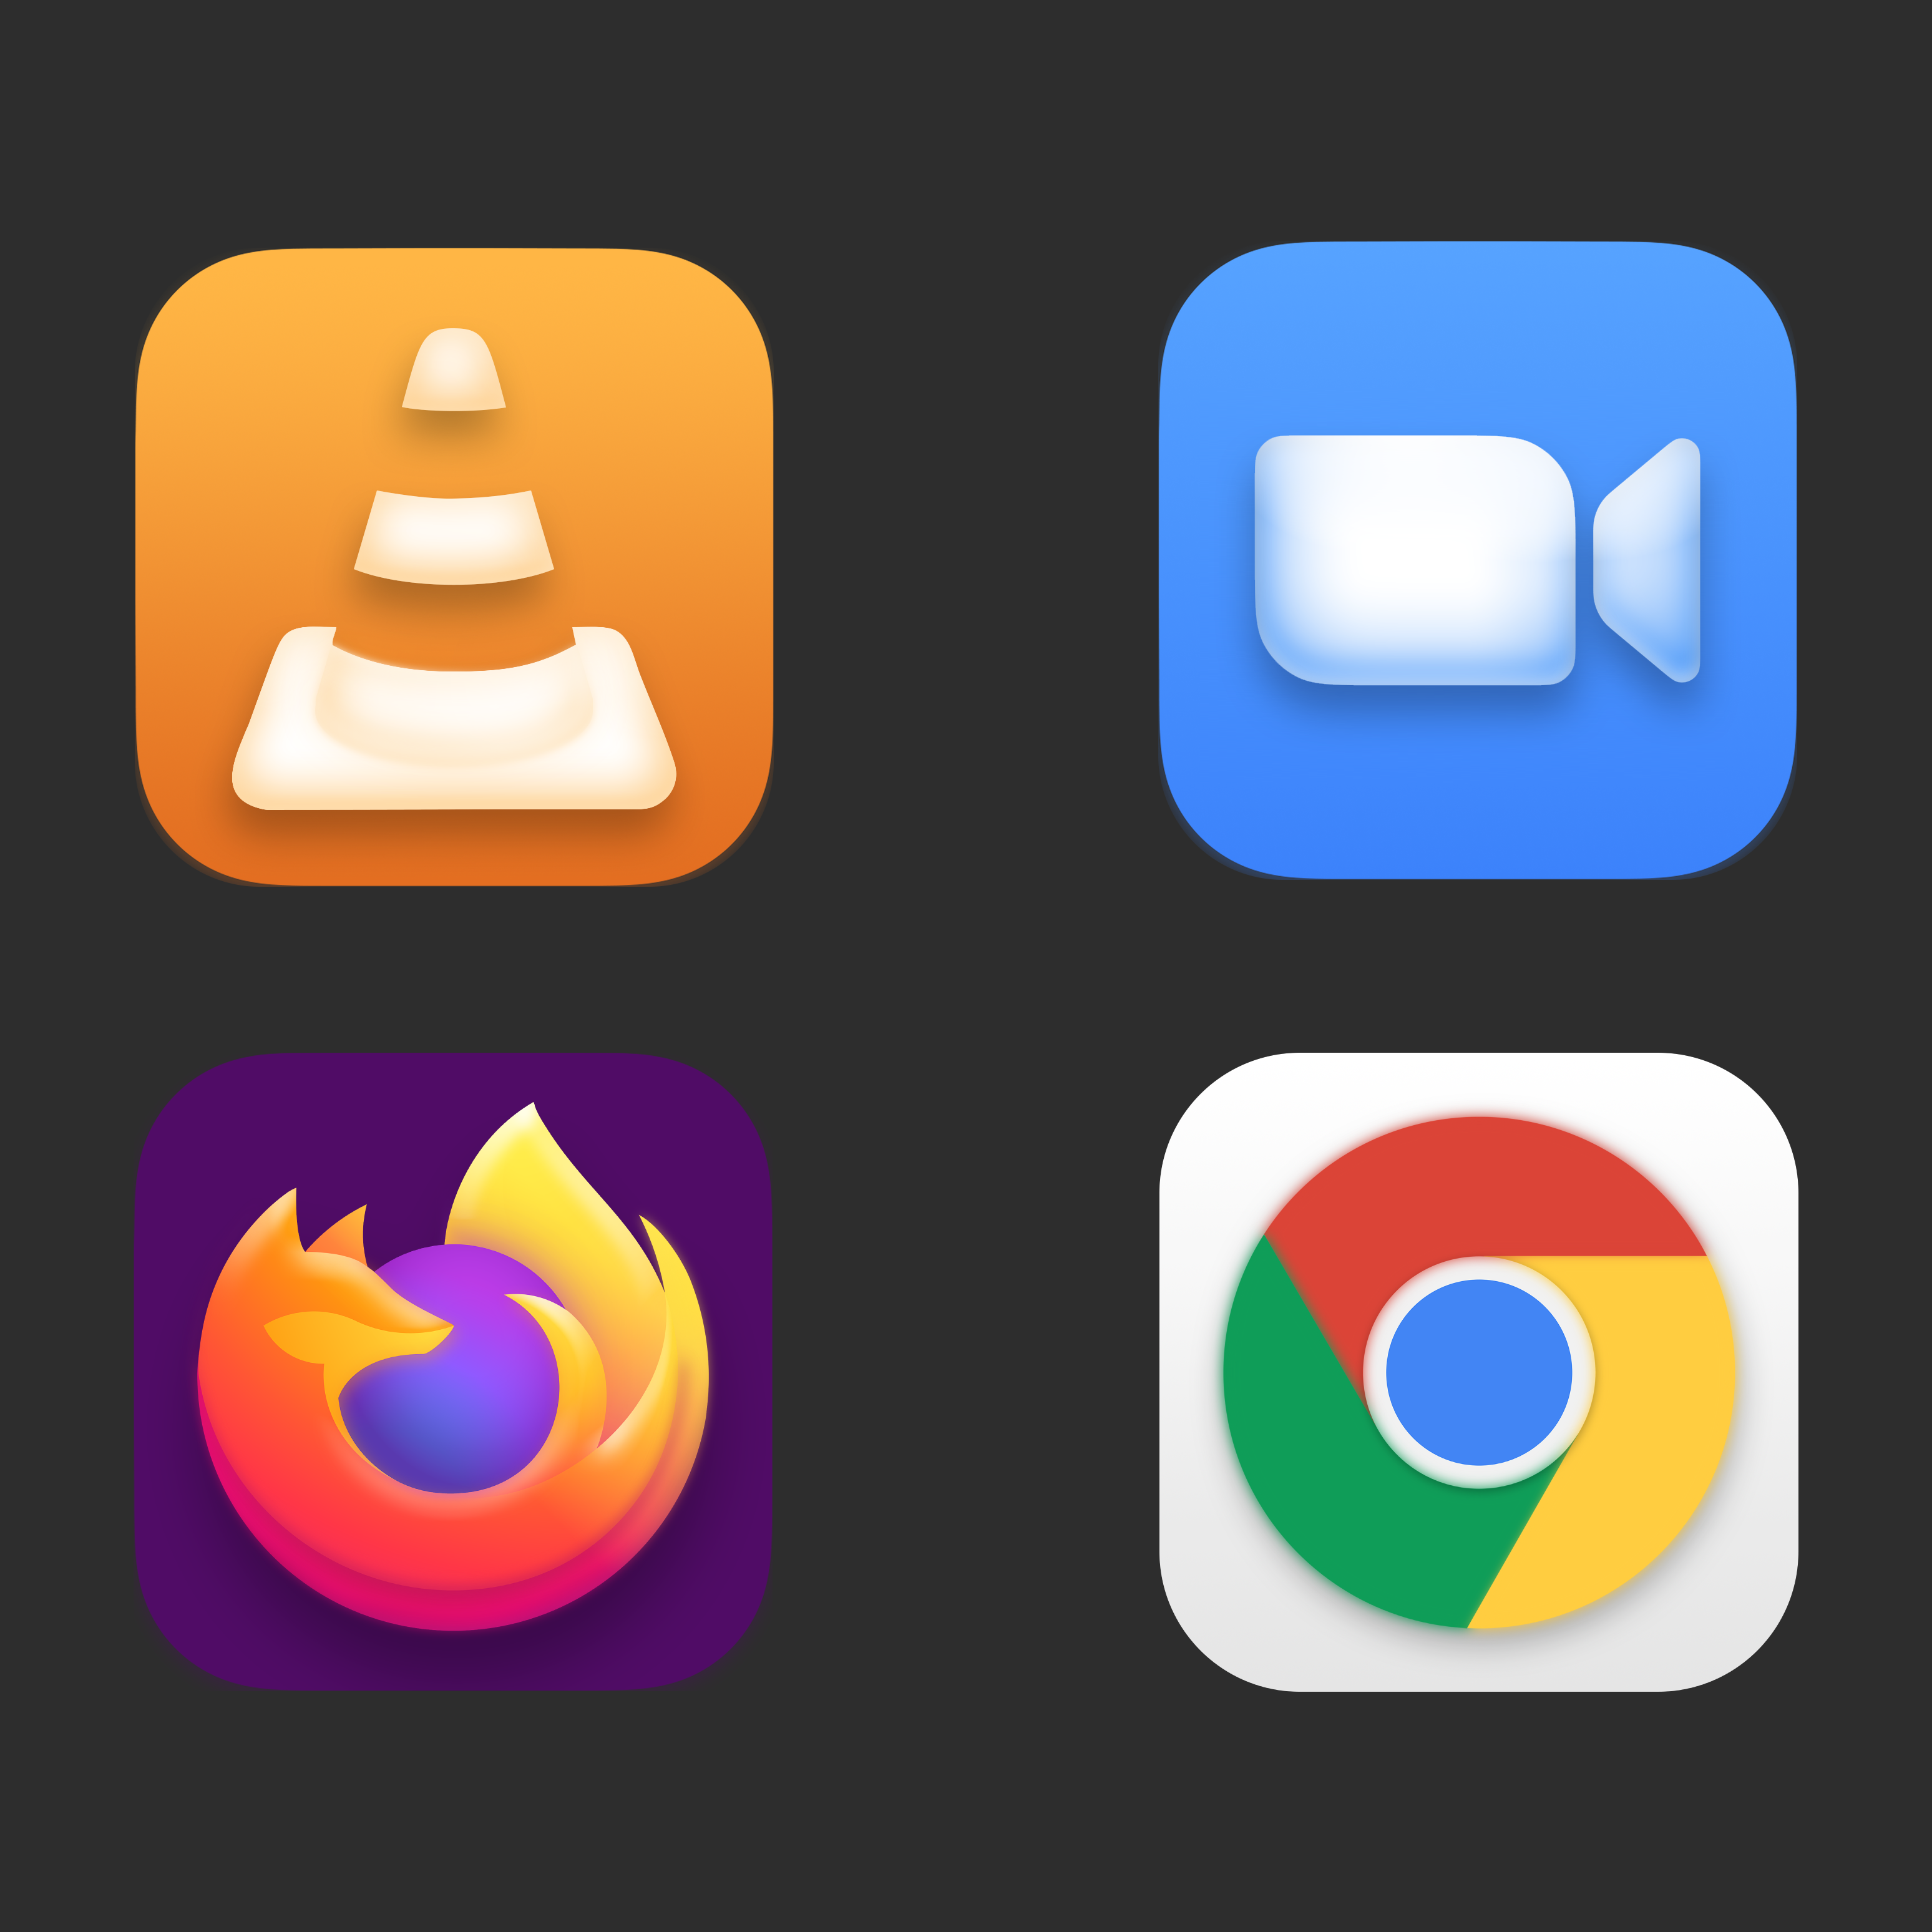 firefox for mac old apps